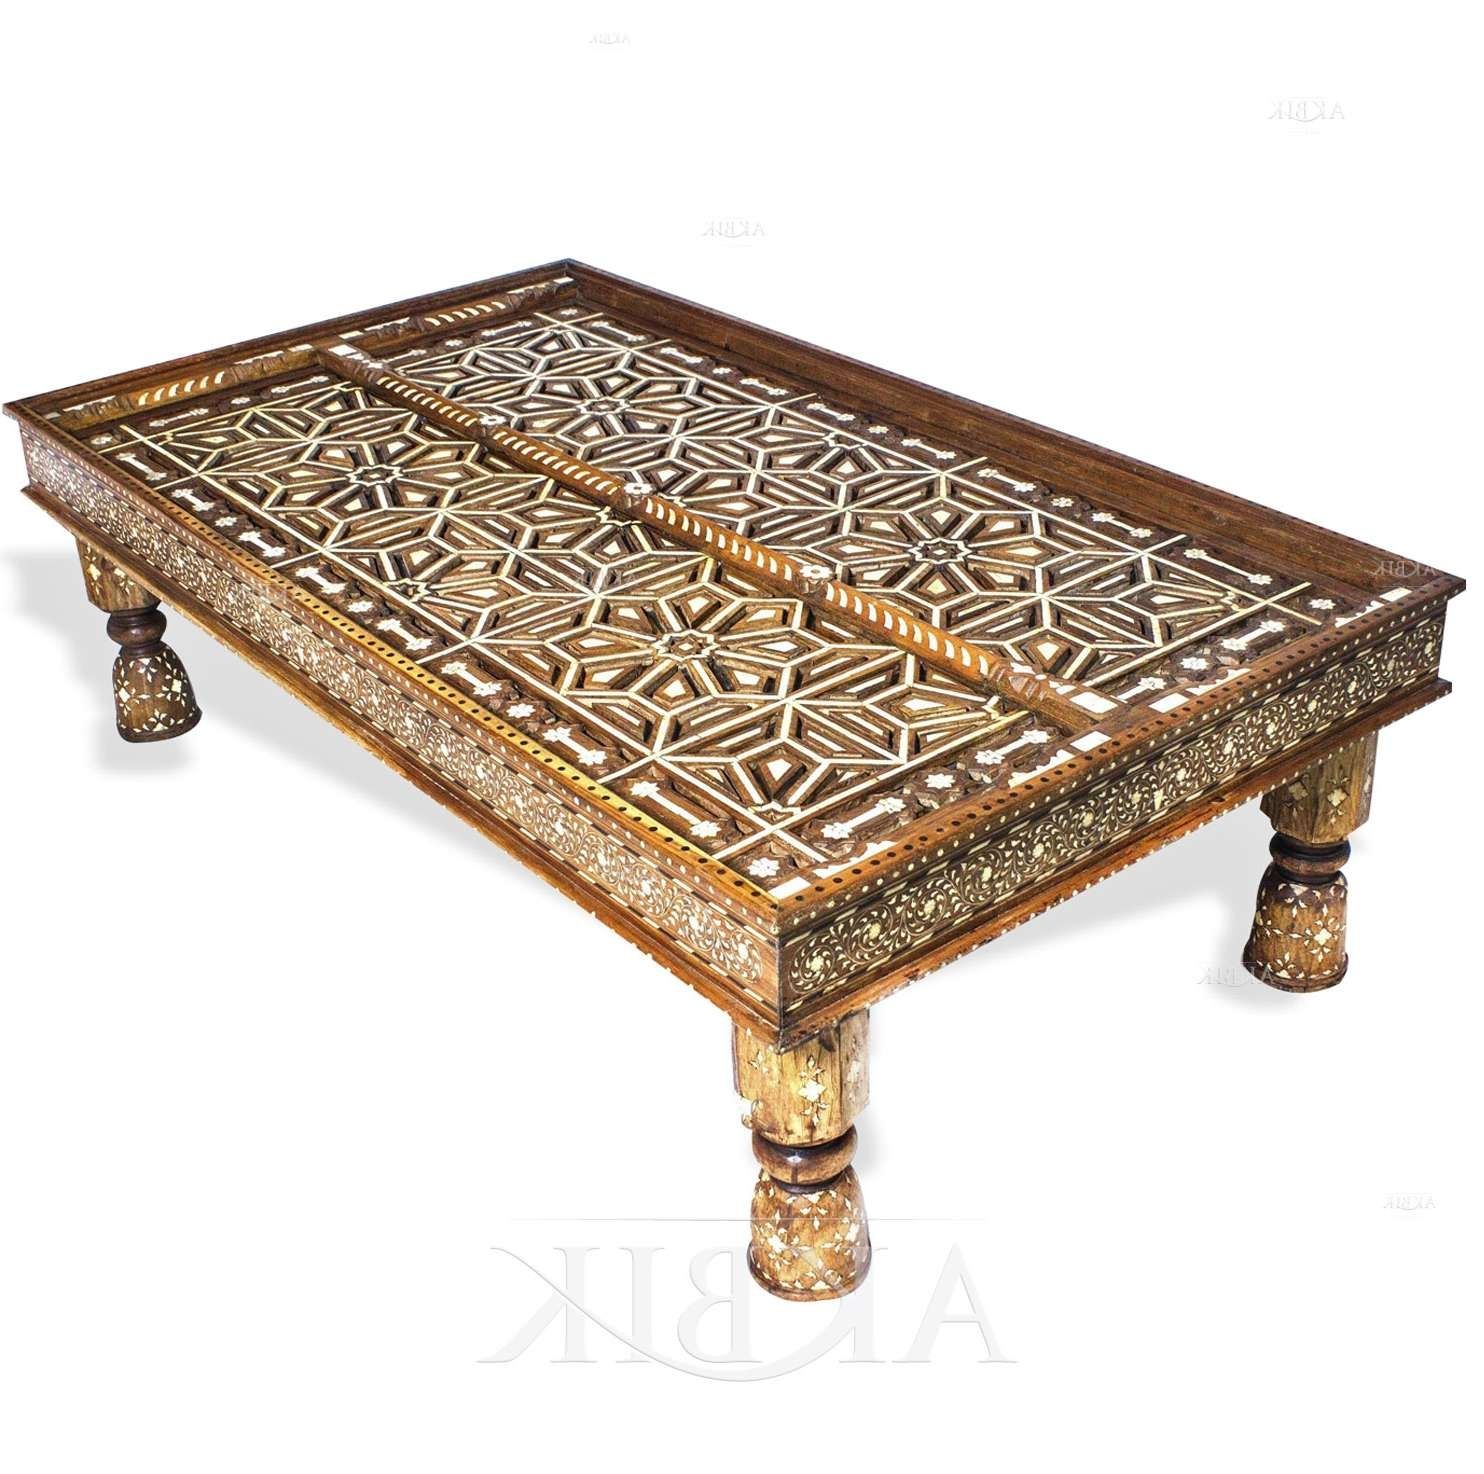 Well Known Indian Coffee Tables Inside Mediterranean, Levantine & Syrian Furniture Inlaid With Mother Of (View 1 of 20)